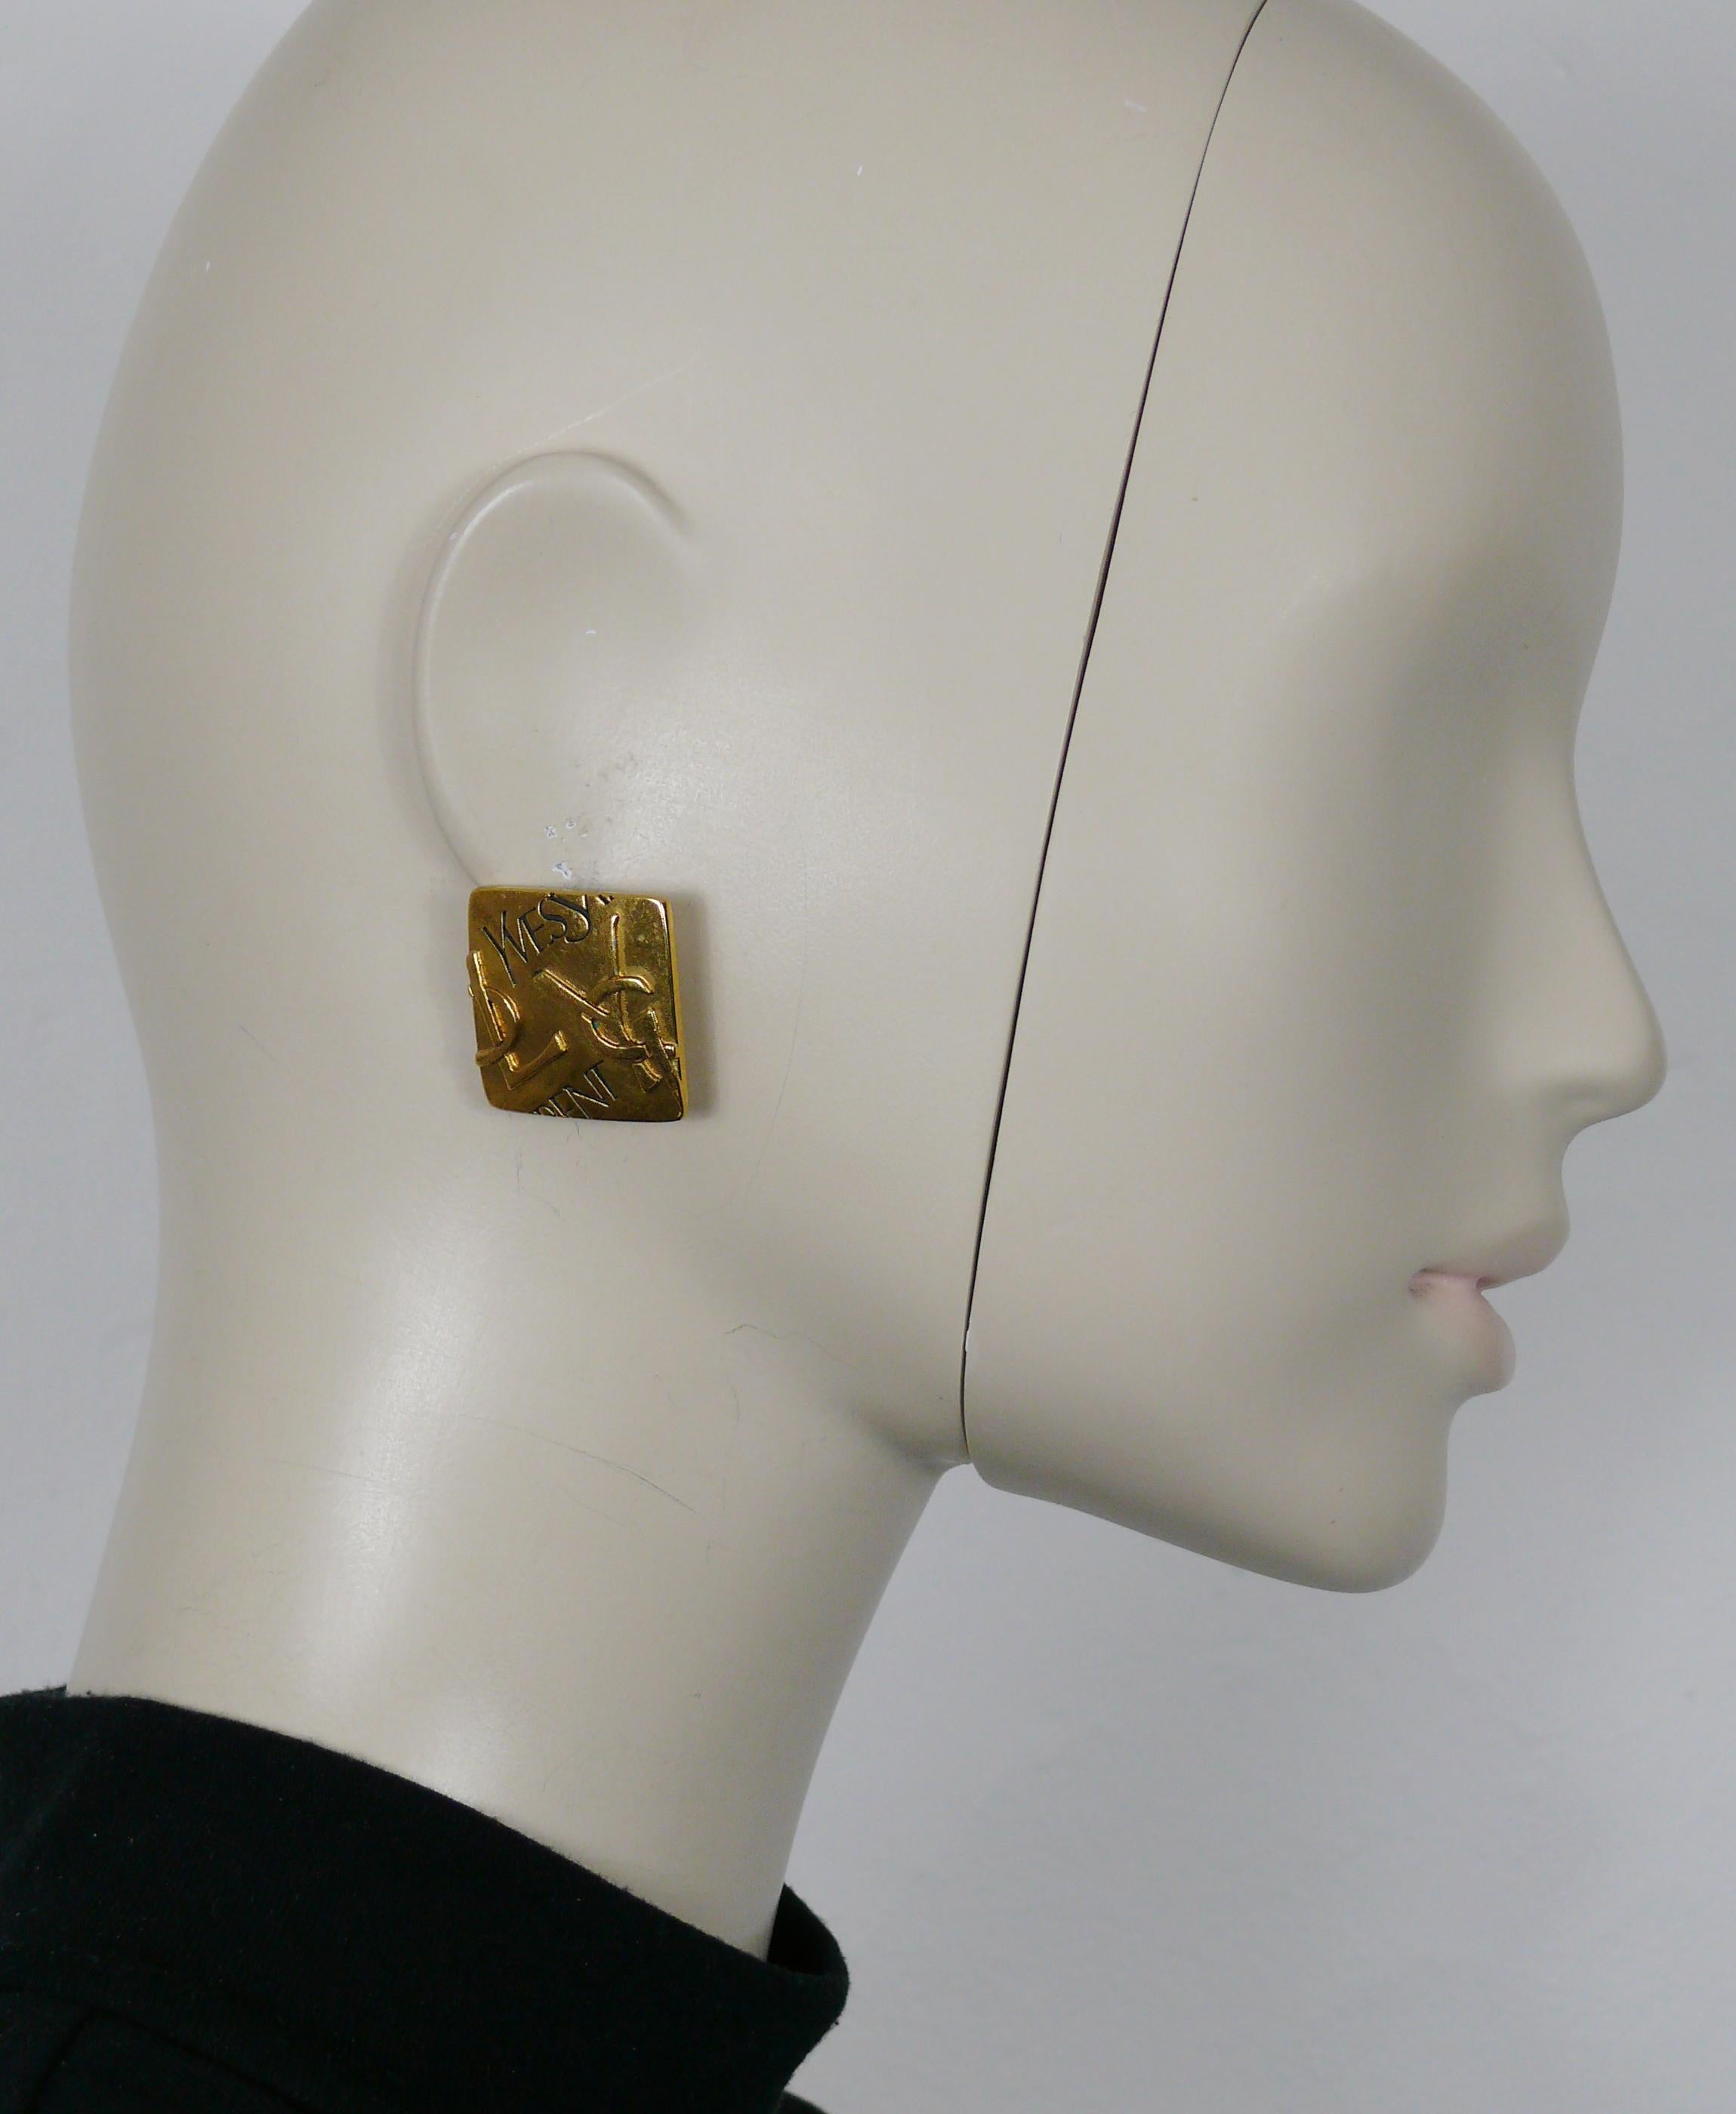 YVES SAINT LAURENT vintage gold tone square clip-on earrings embossed with YSL logos.

Embossed YSL Made in France.

Indicative measurements : approx. 2.6 cm x 2.6 cm (1.02 inches x 1.02 inches).

Weight per earrings : approx. 12 grams.

Material :